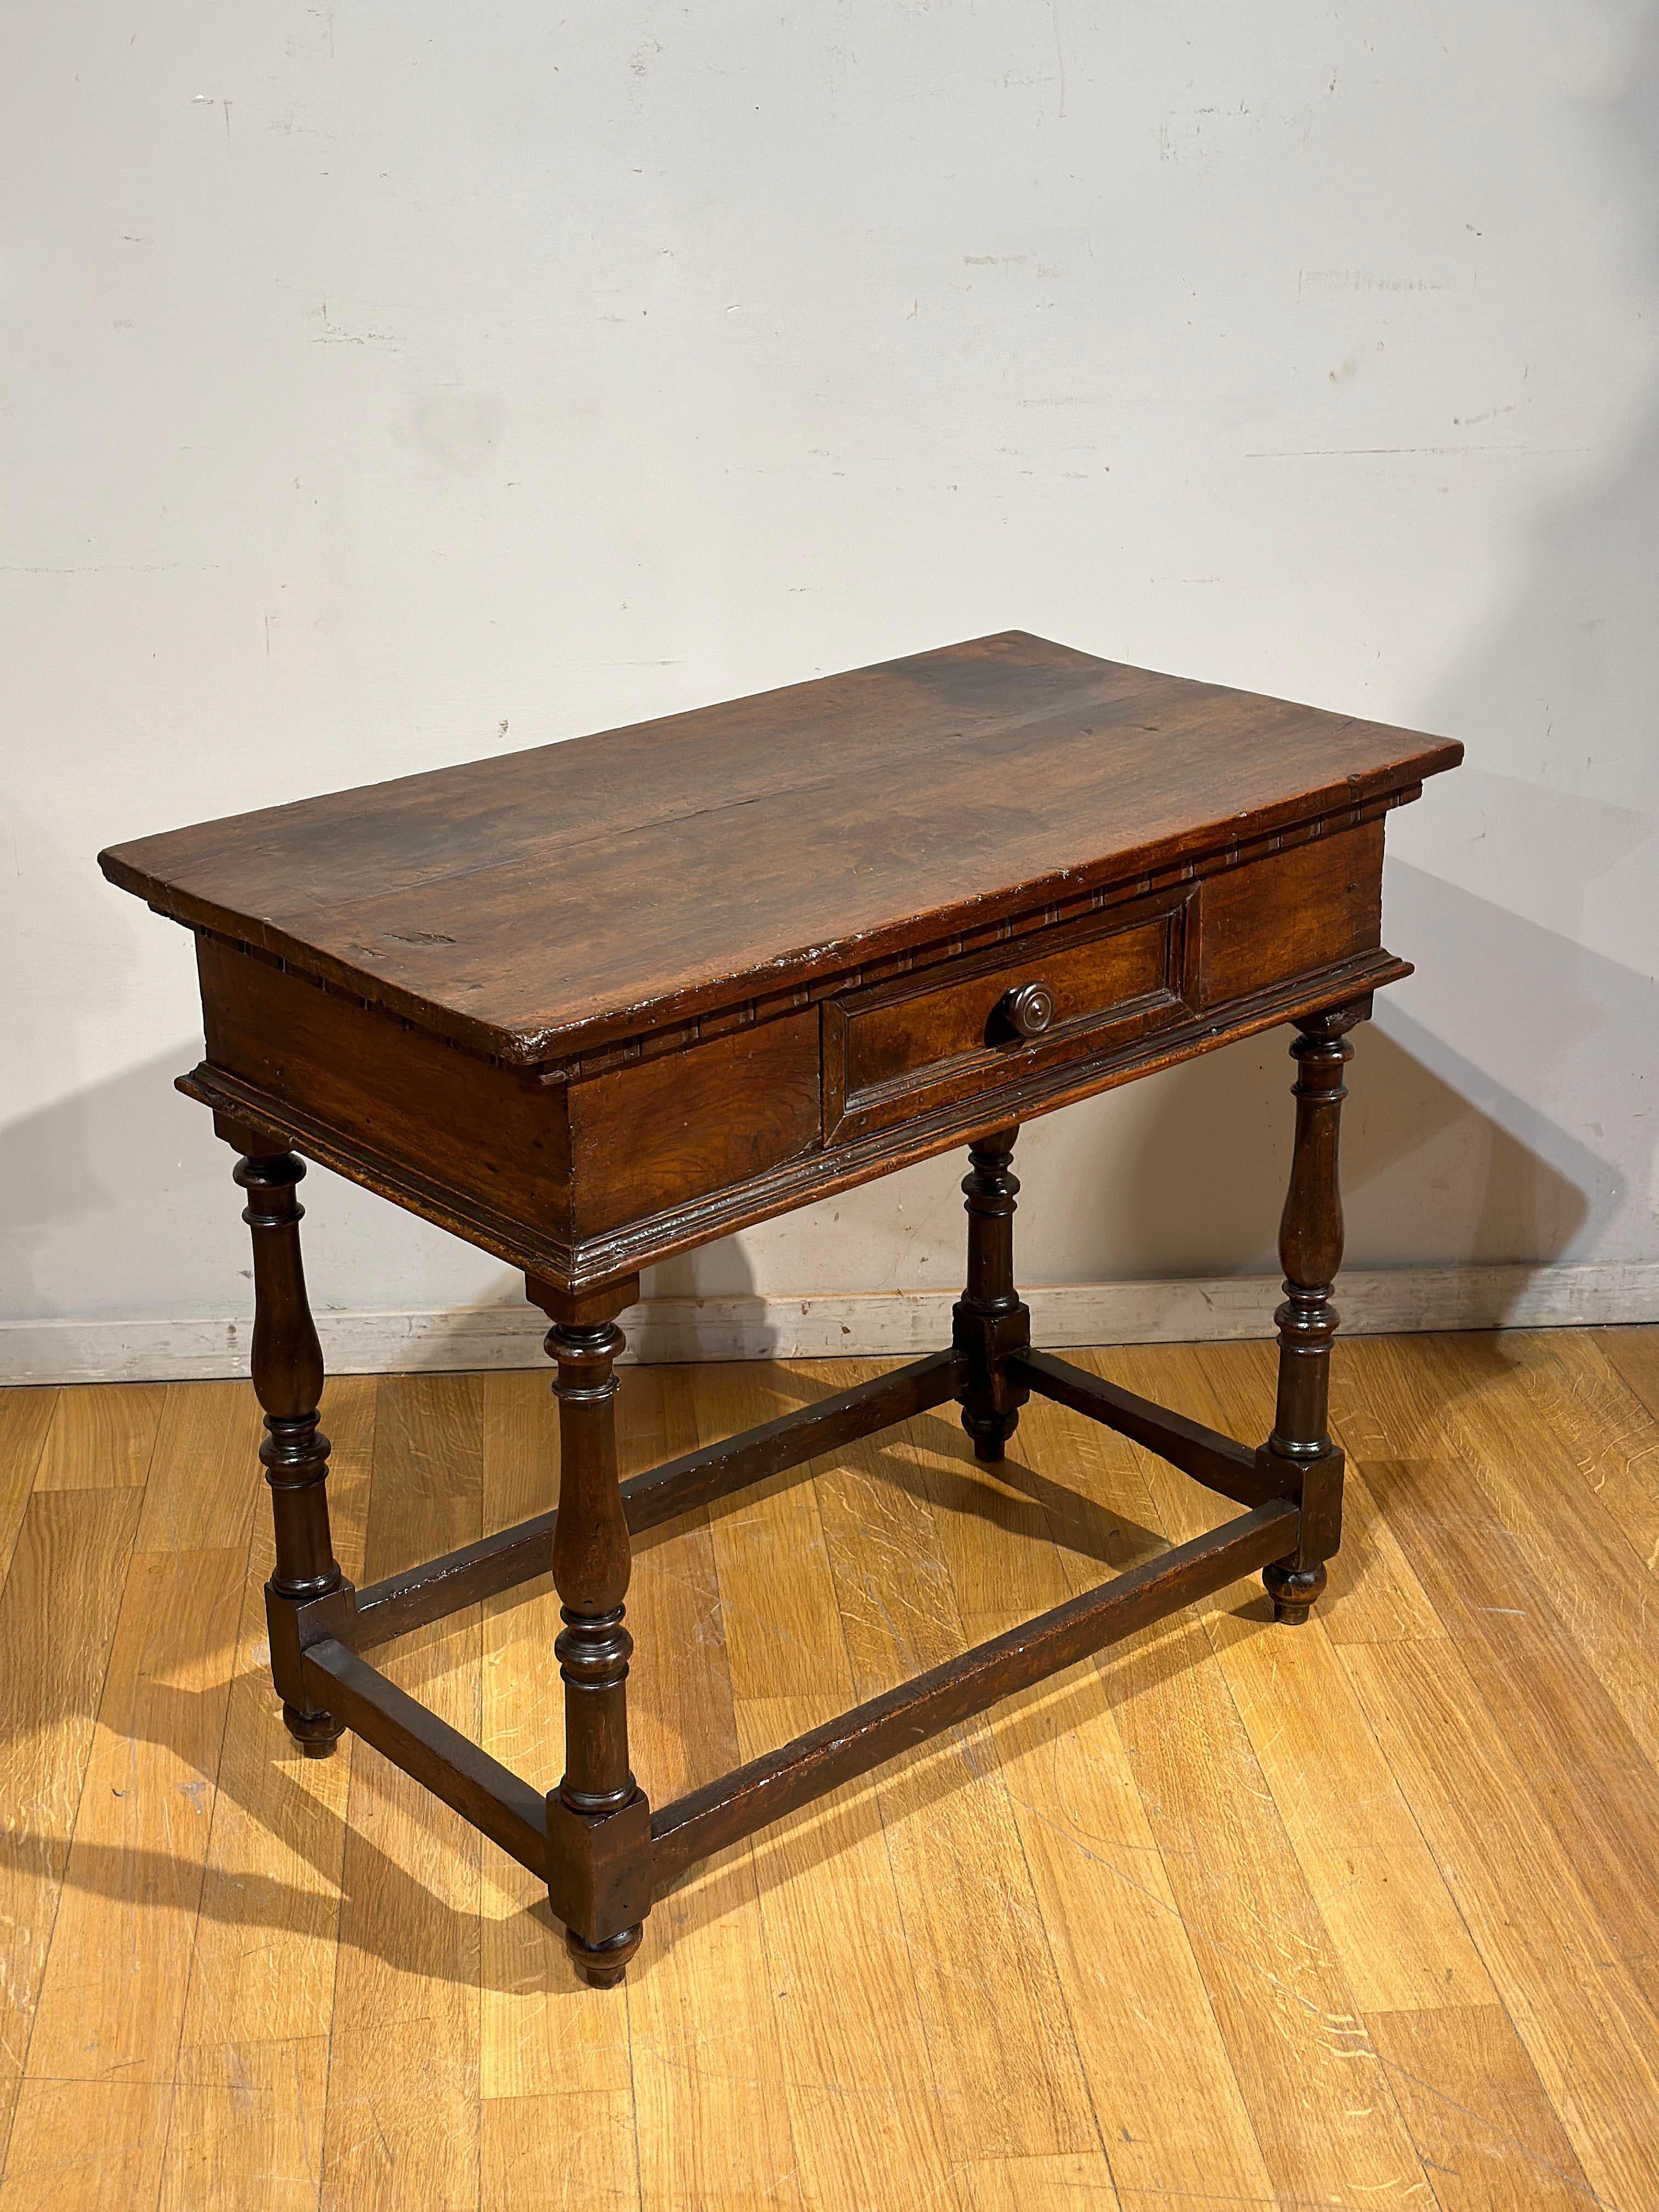 Louis XIV END OF THE 16th CENTURY LOUIS XIV TABLE WITH DRAWER For Sale